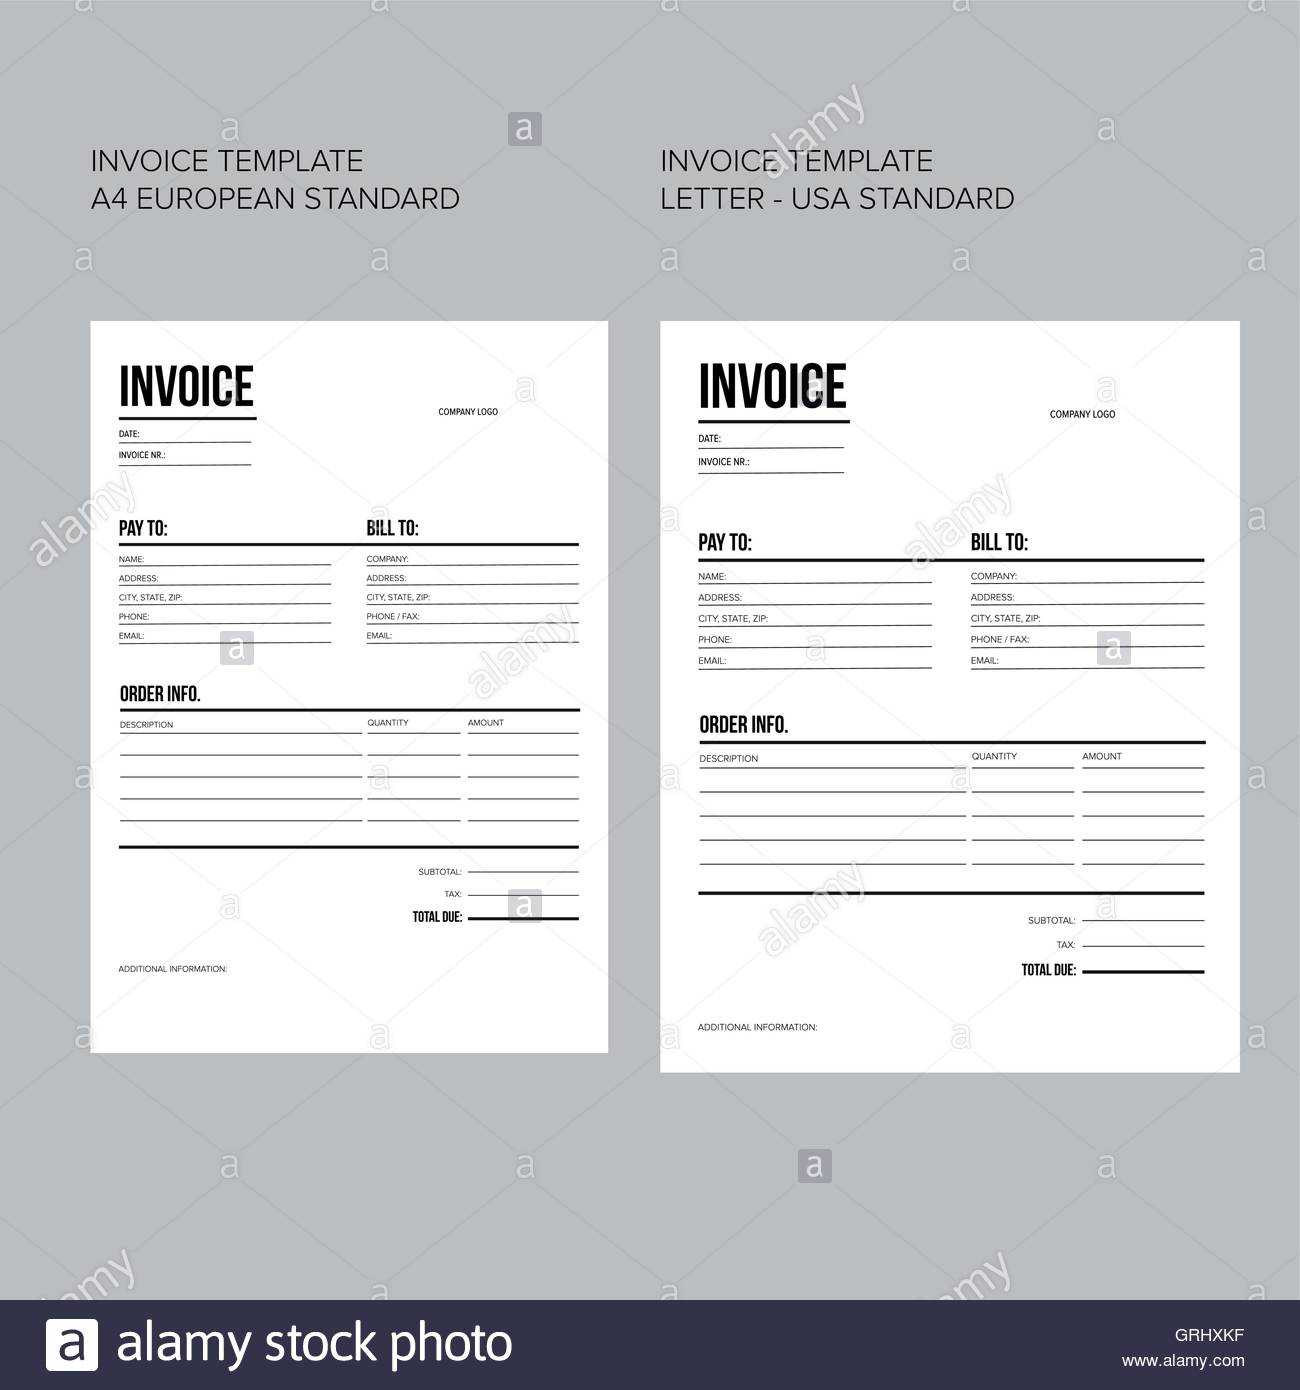 Invoice / Business Template – European And Usa Standard Throughout European Invoice Template